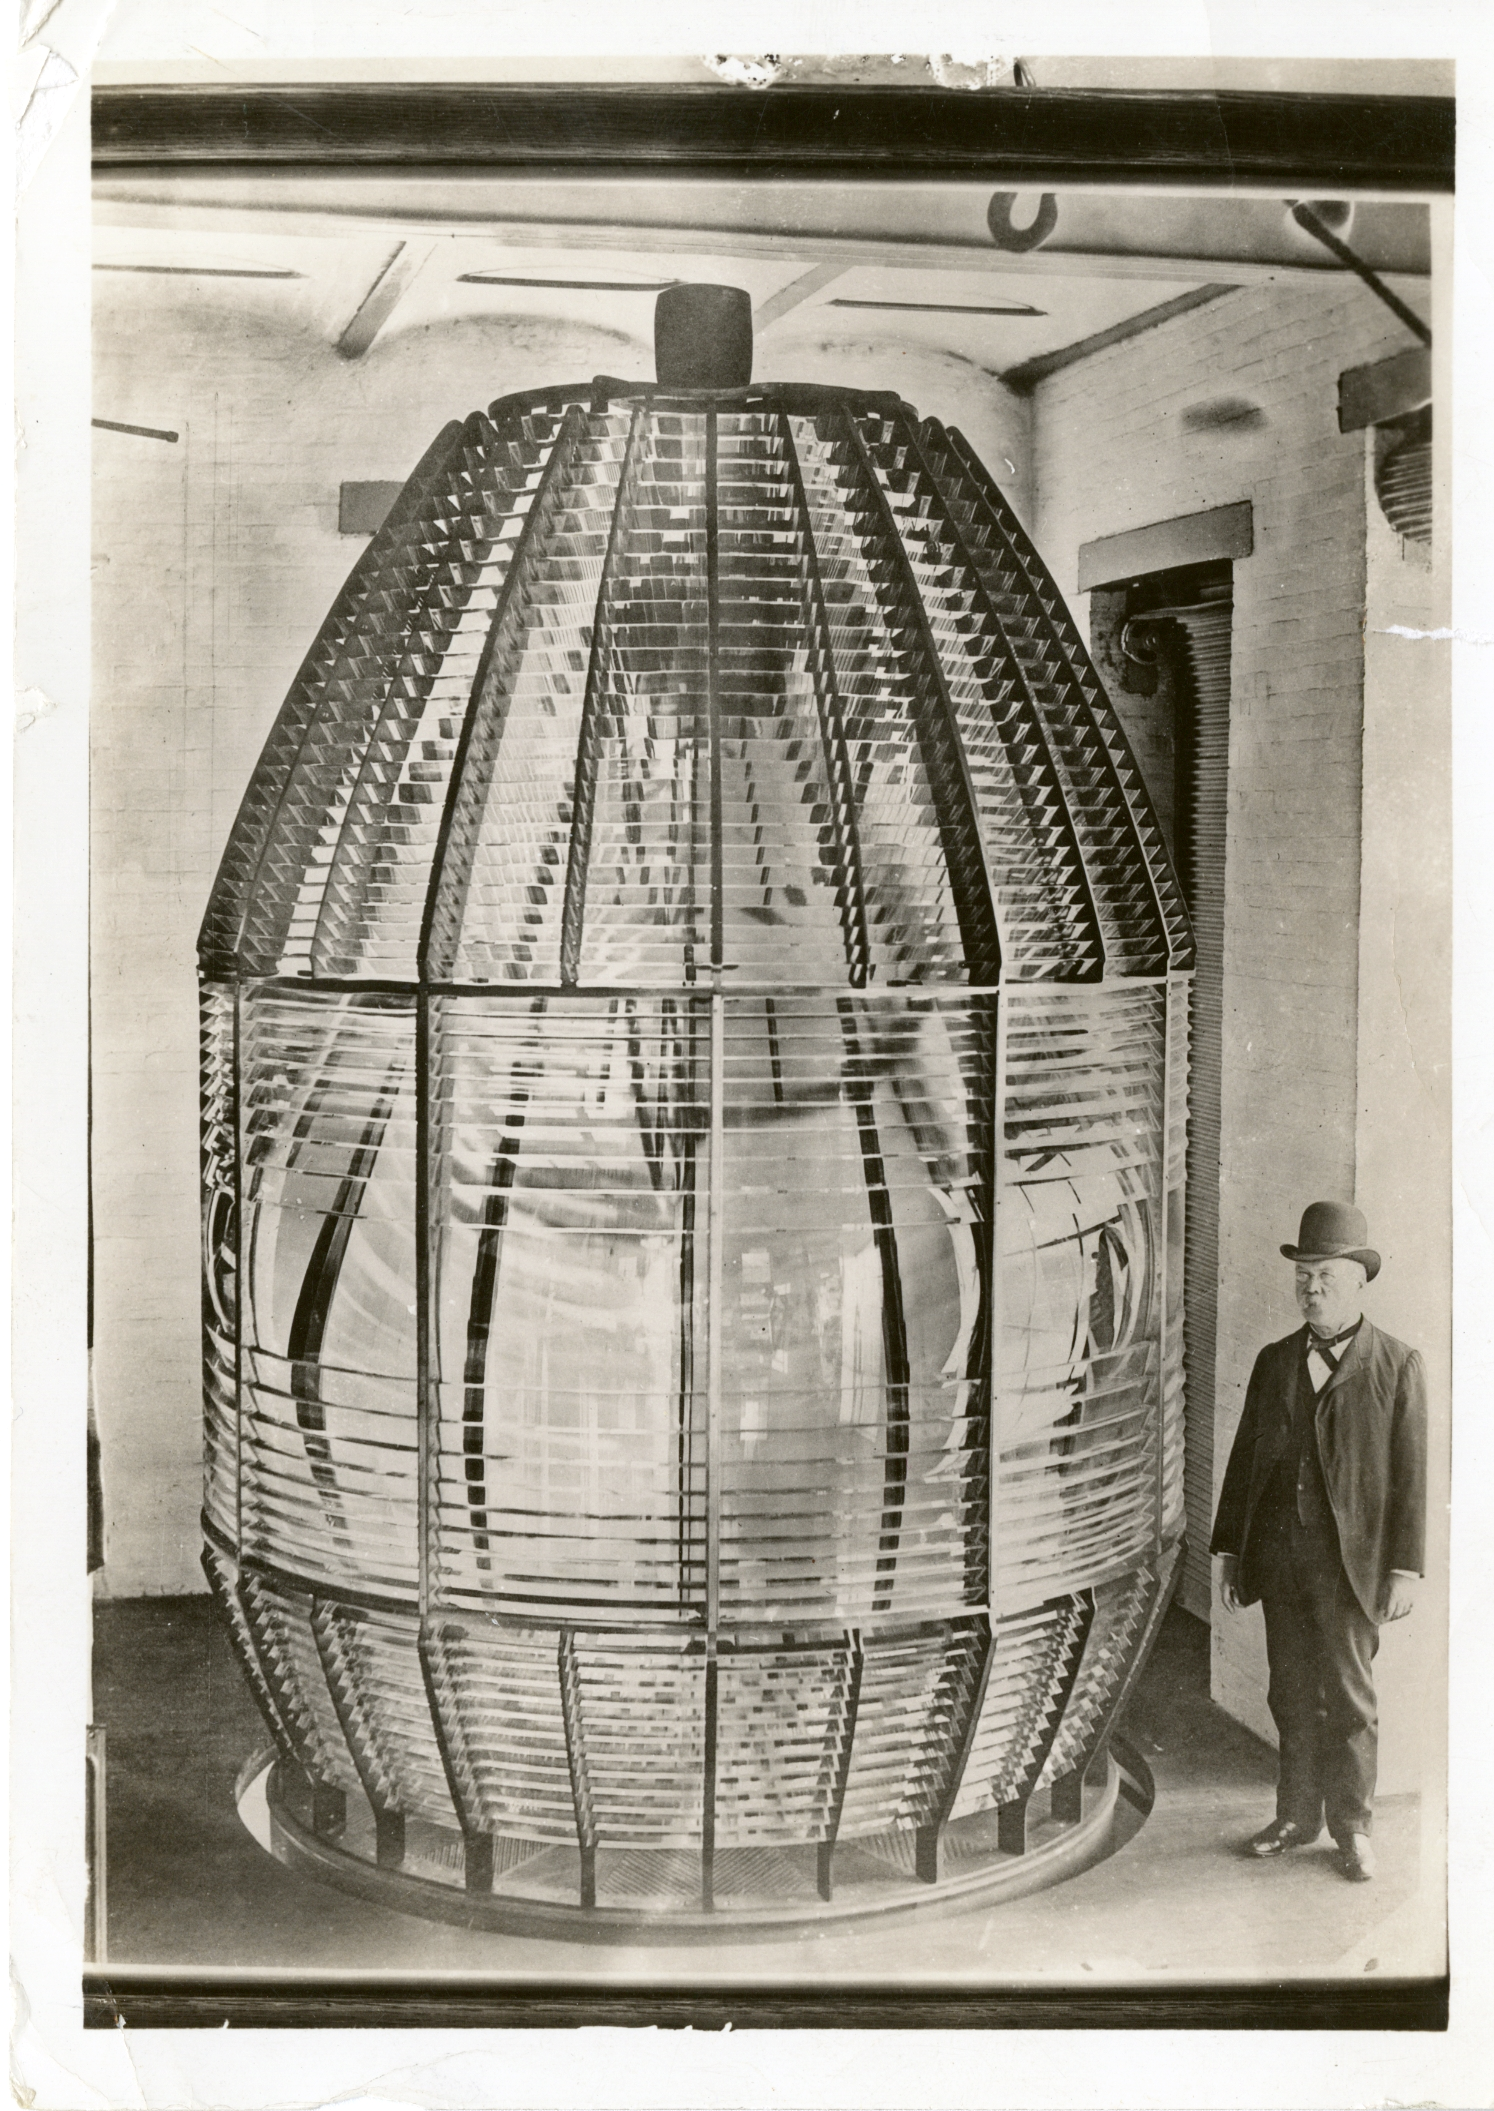 Vintage photograph of the magnificent first order lens at Makapu’u Lighthouse, which was maintained by Manuel Ferreira for thirteen years. (U.S. Coast Guard Collection)